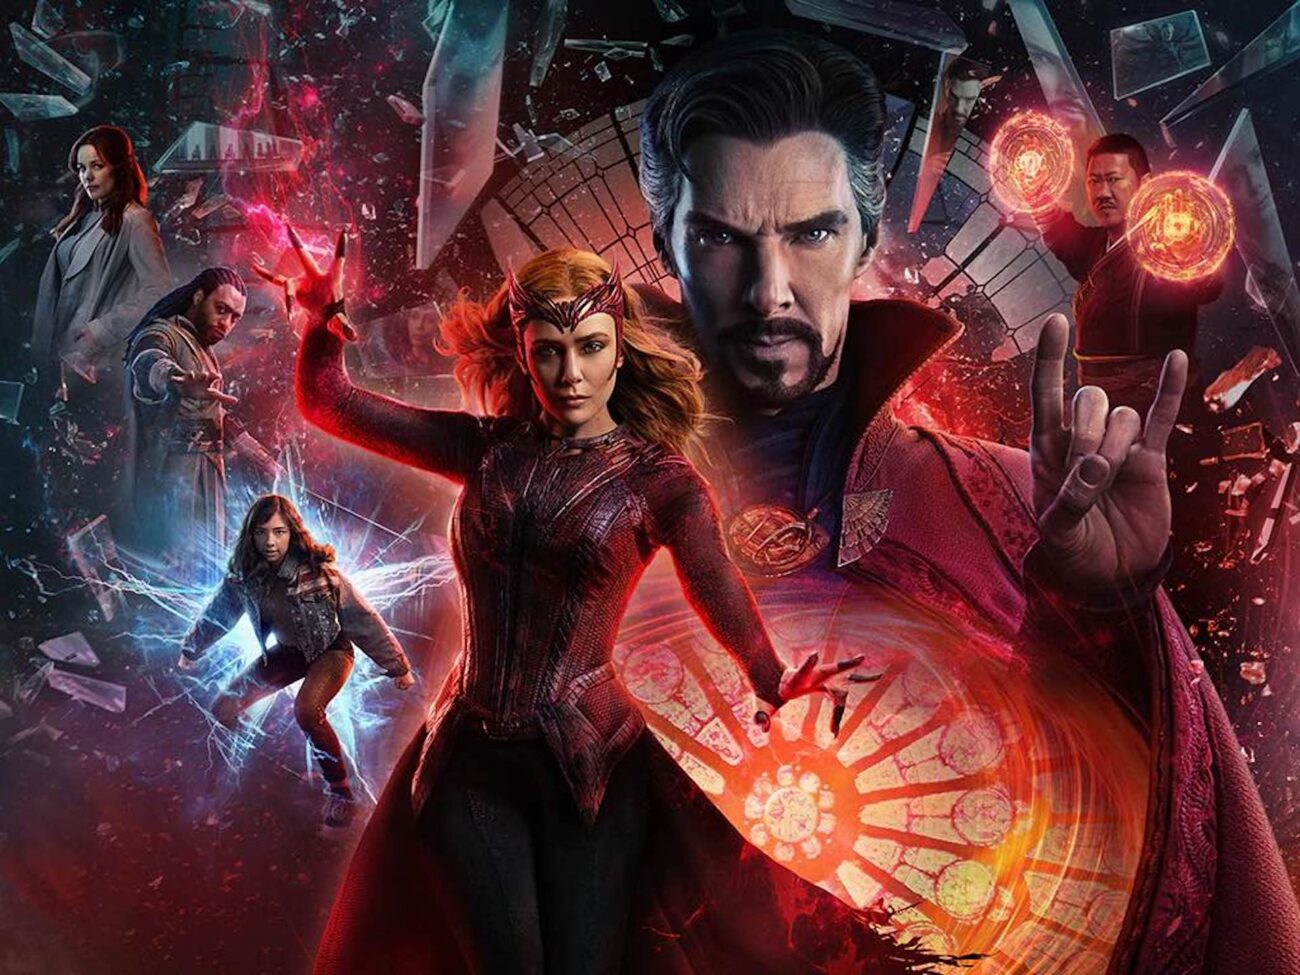 'Doctor Strange 2' is finally here. The only way to watch Dr Strange: Multiverse of Madness 2022 movie without theaters, how to stream it online for free!